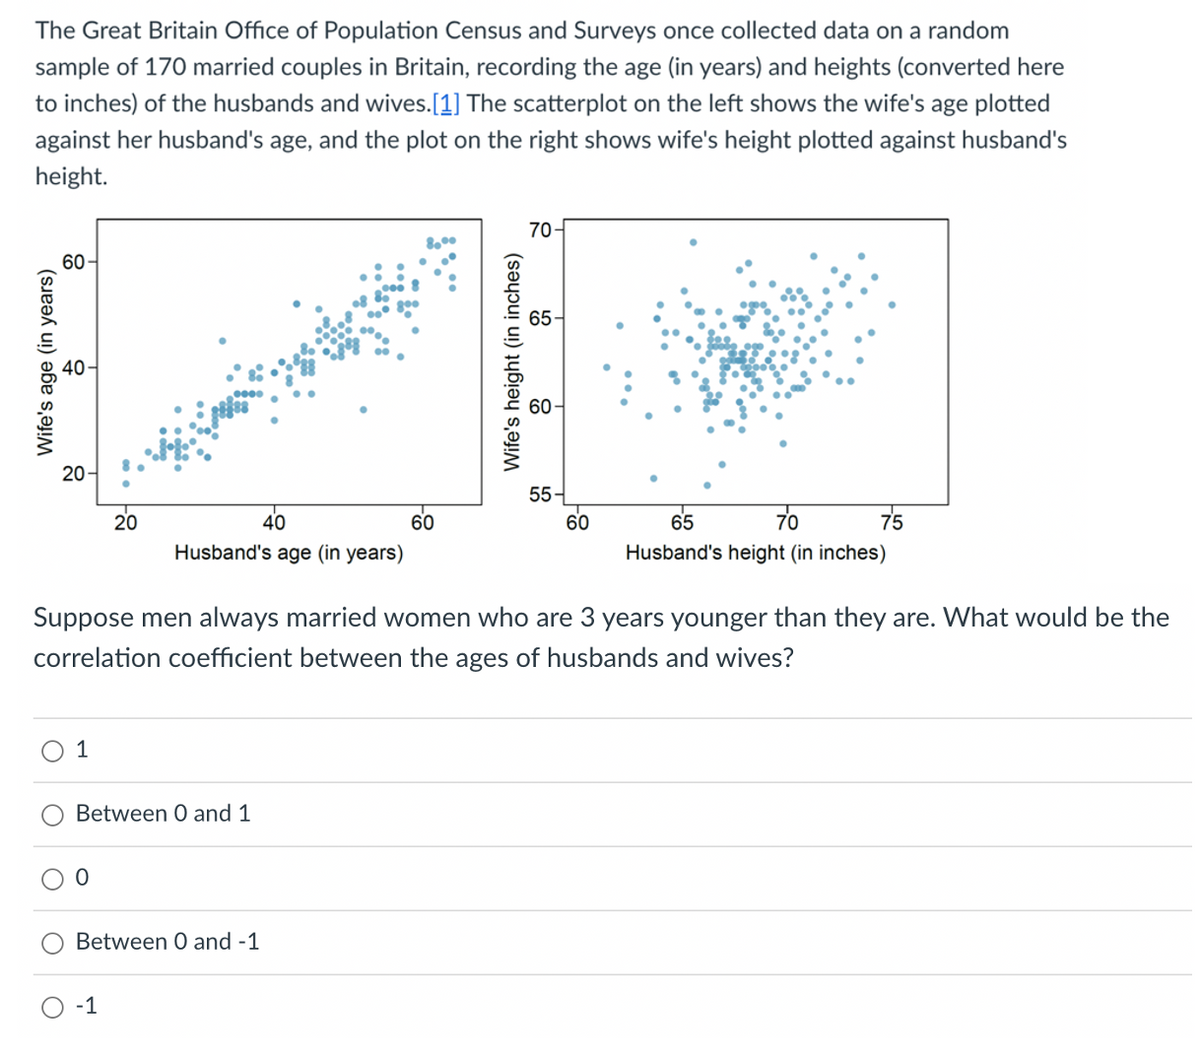 The Great Britain Office of Population Census and Surveys once collected data on a random
sample of 170 married couples in Britain, recording the age (in years) and heights (converted here
to inches) of the husbands and wives.[1] The scatterplot on the left shows the wife's age plotted
against her husband's age, and the plot on the right shows wife's height plotted against husband's
height.
Wife's age (in years)
60-
20-
1
20
0
40
Husband's age (in years)
Between 0 and 1
-1
Between 0 and -1
60
Wife's height (in inches)
70
65
Suppose men always married women who are 3 years younger than they are. What would be the
correlation coefficient between the ages of husbands and wives?
60
55-
60
65
75
70
Husband's height (in inches)